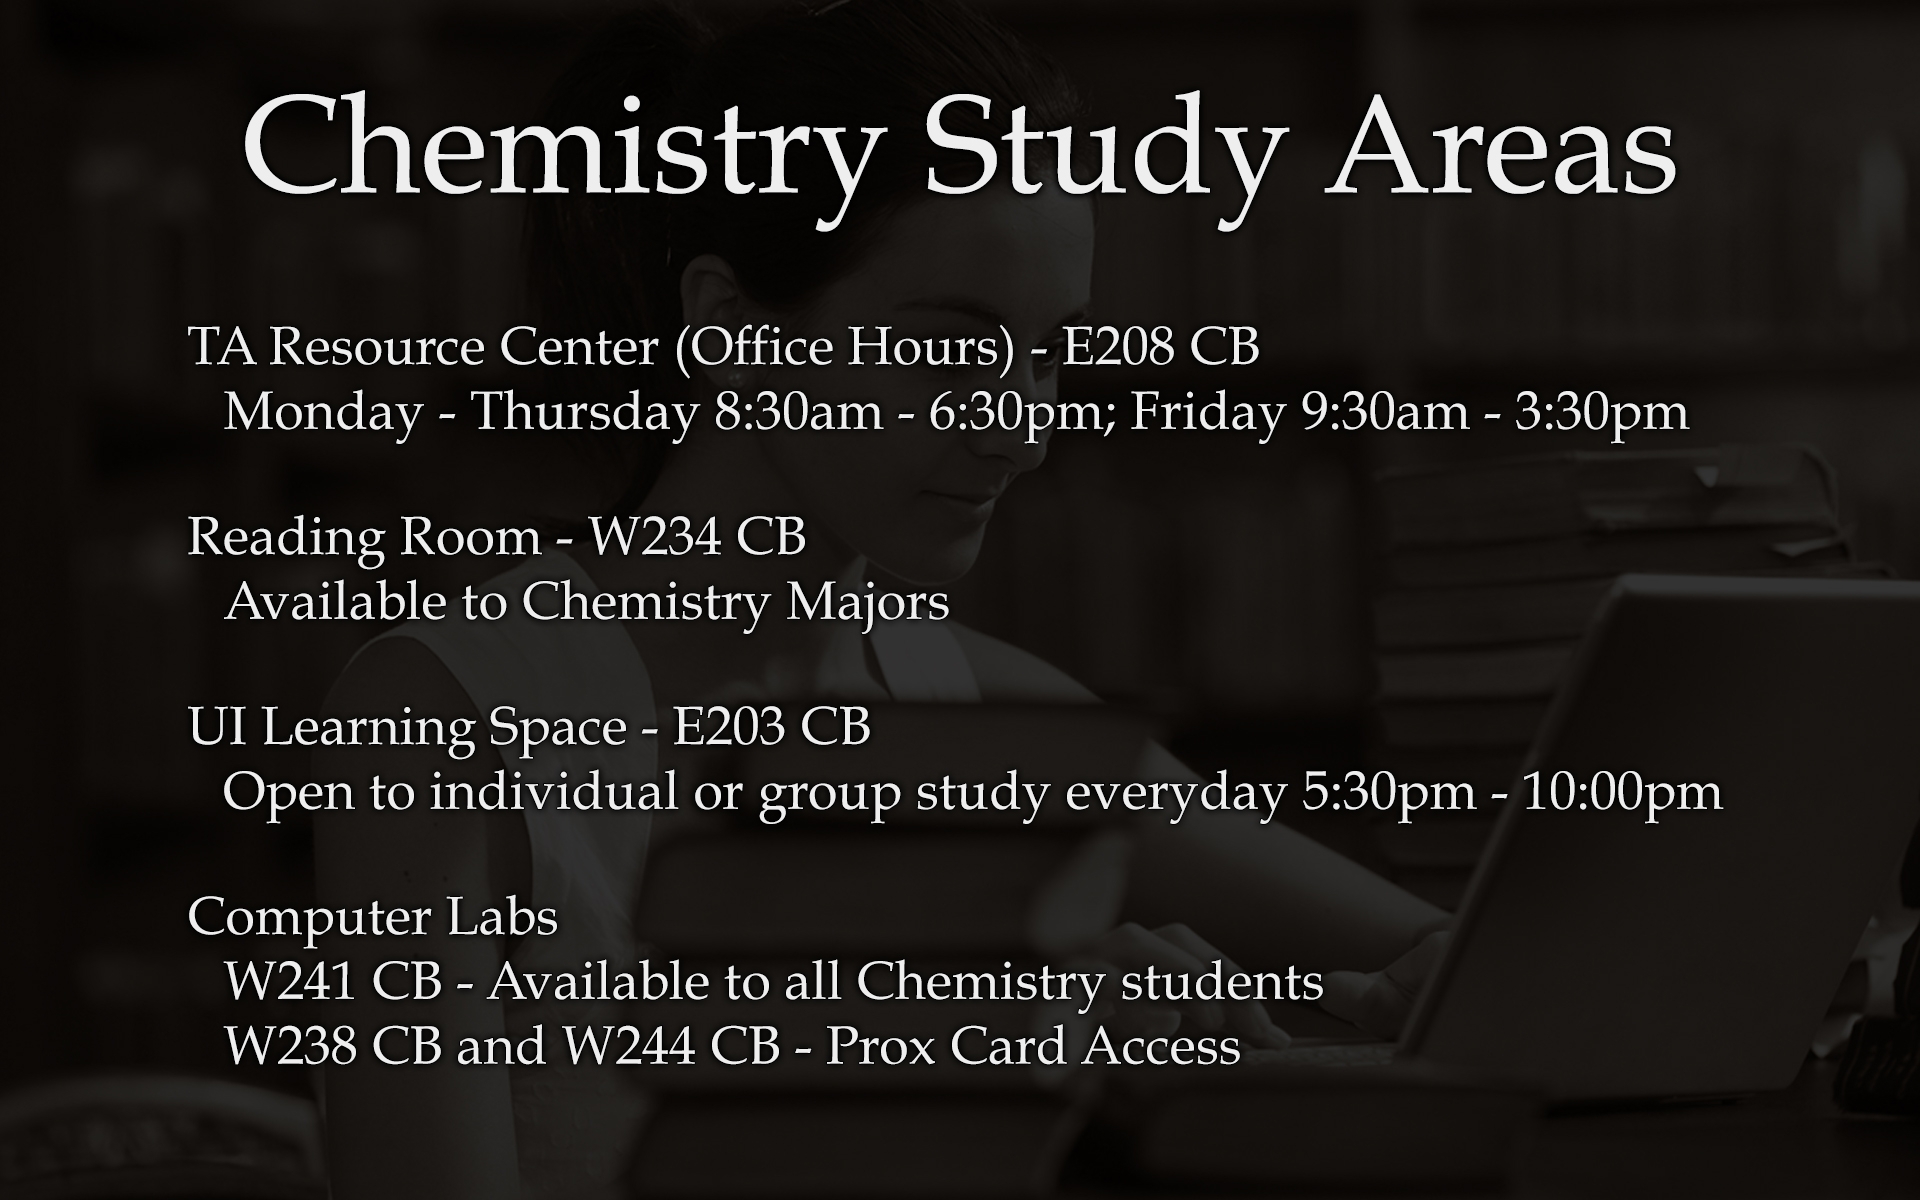 TA Resource Center (Office Hours) - E208 CB Monday - Thursday 8:30am - 6:30pm; Friday 9:30am - 3:30pm